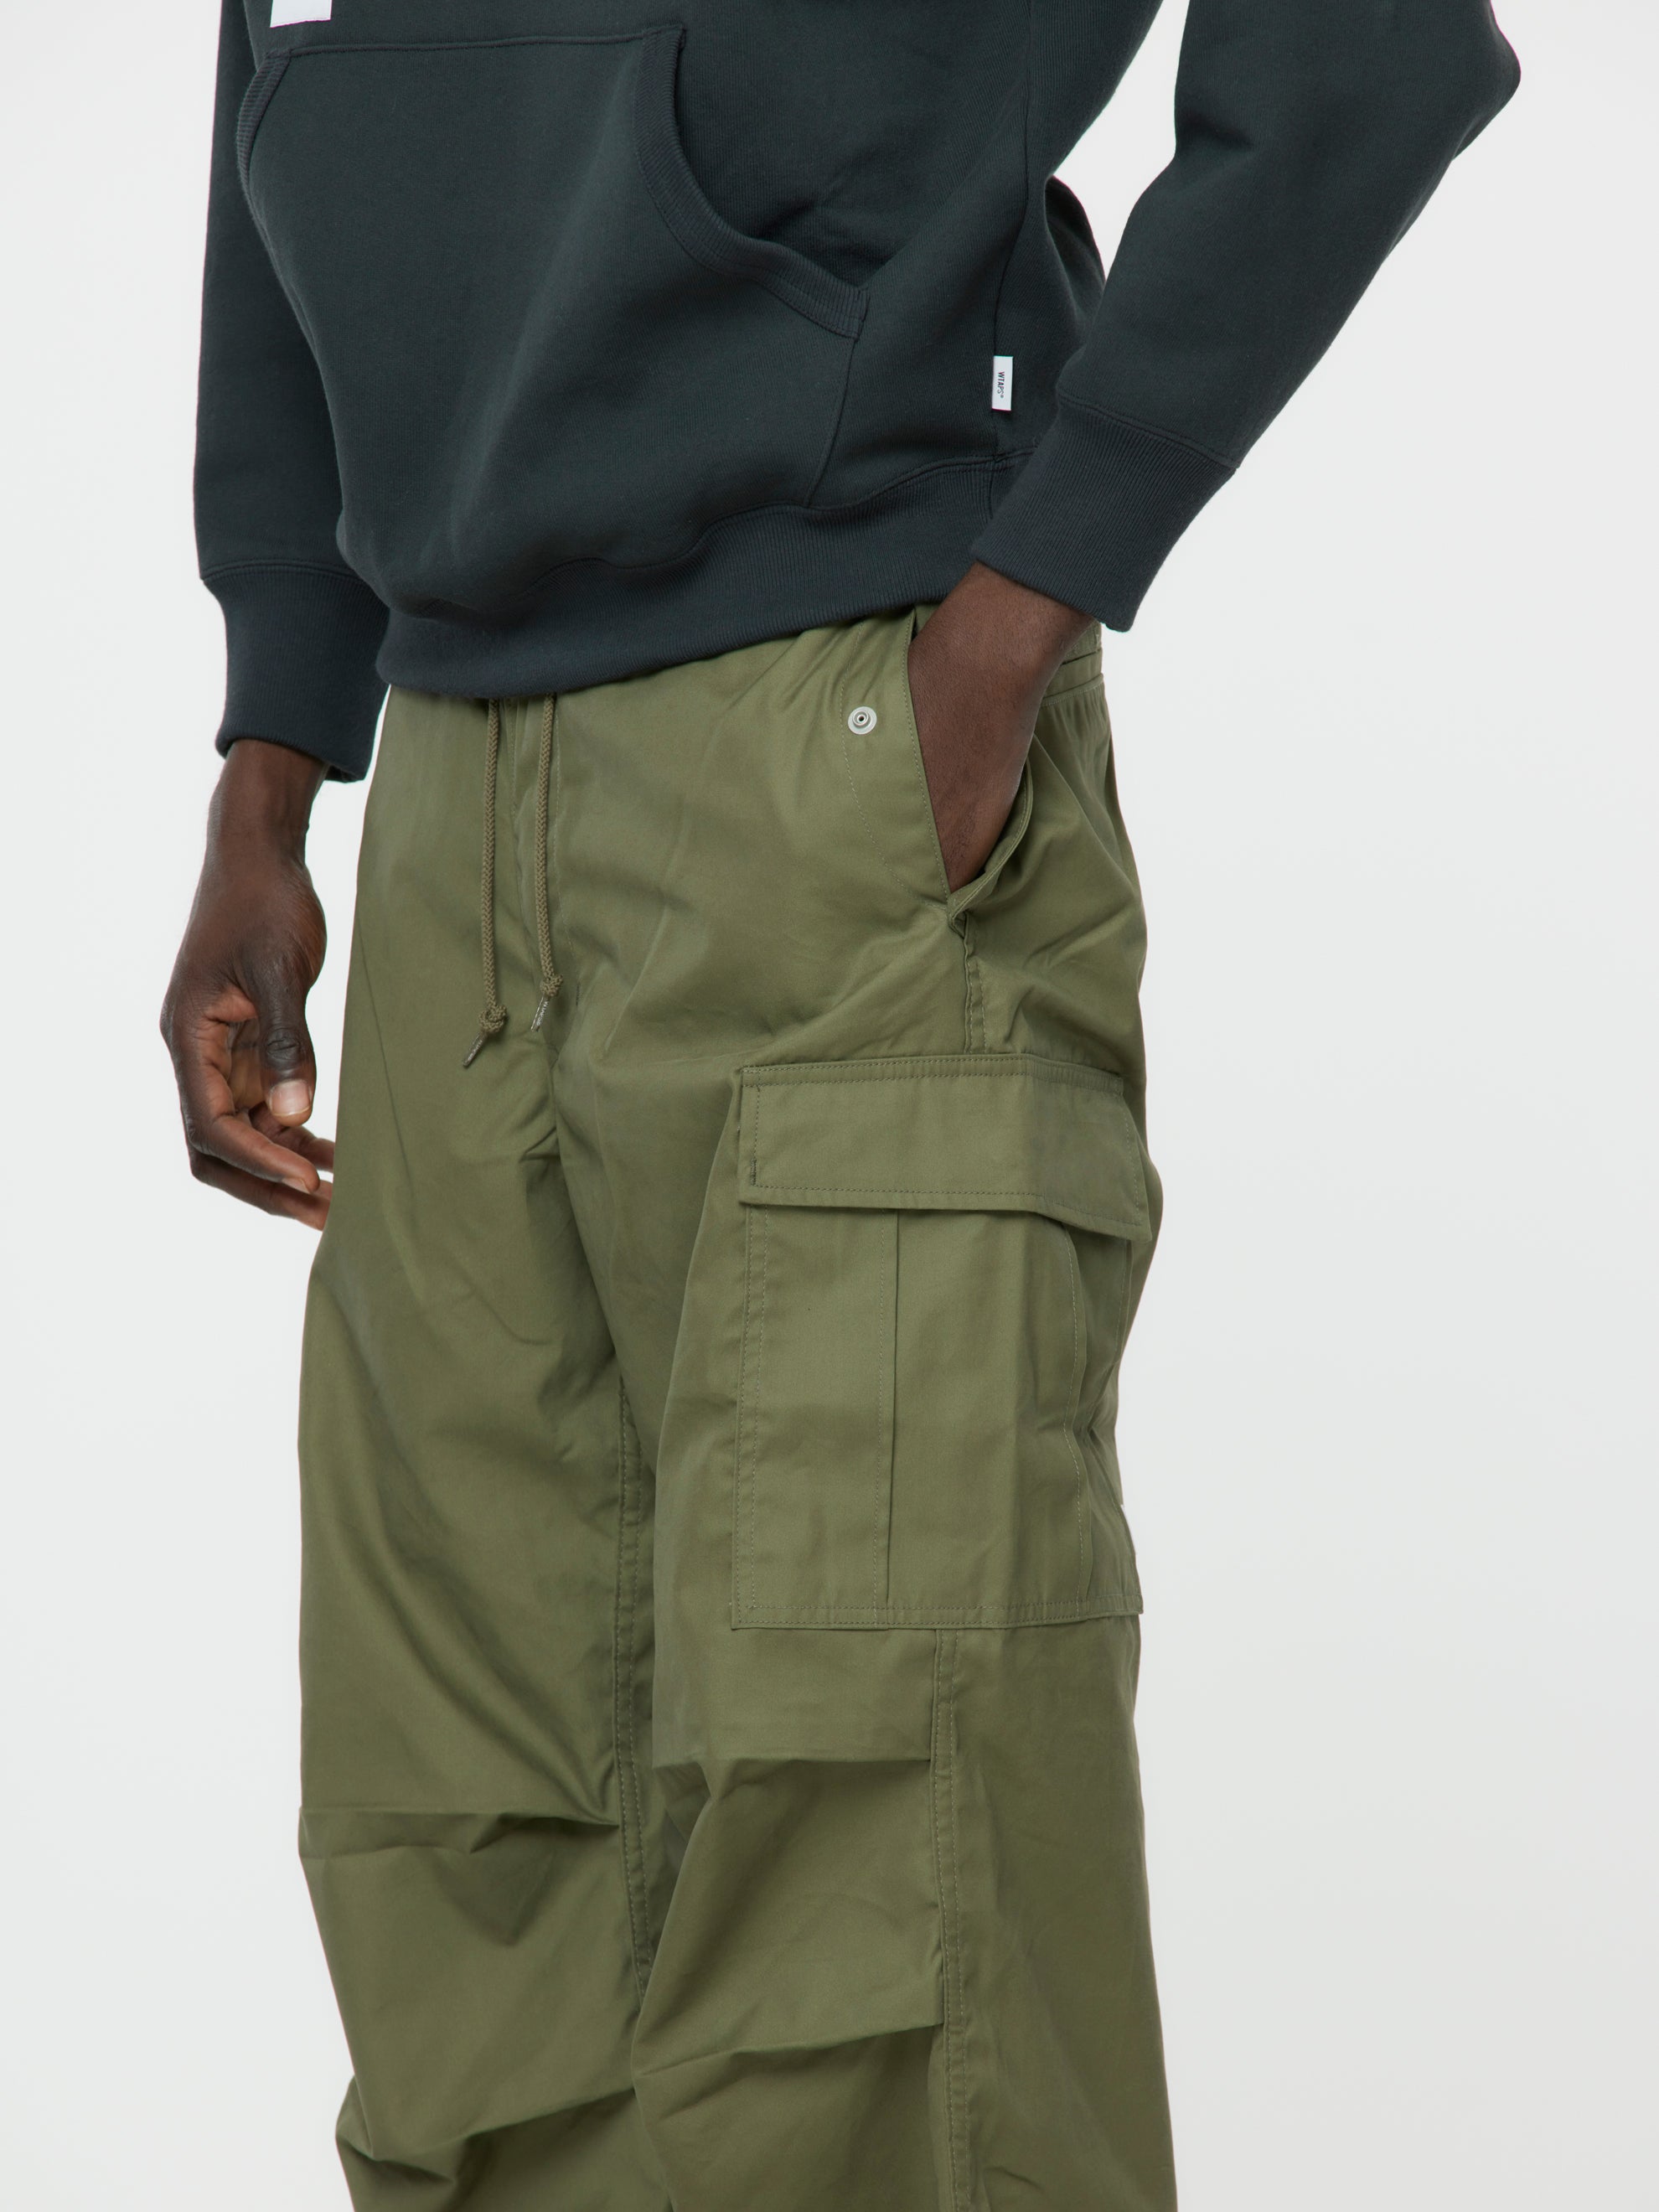 MILT0001 / TROUSERS / NYCO. (Olive Drab)